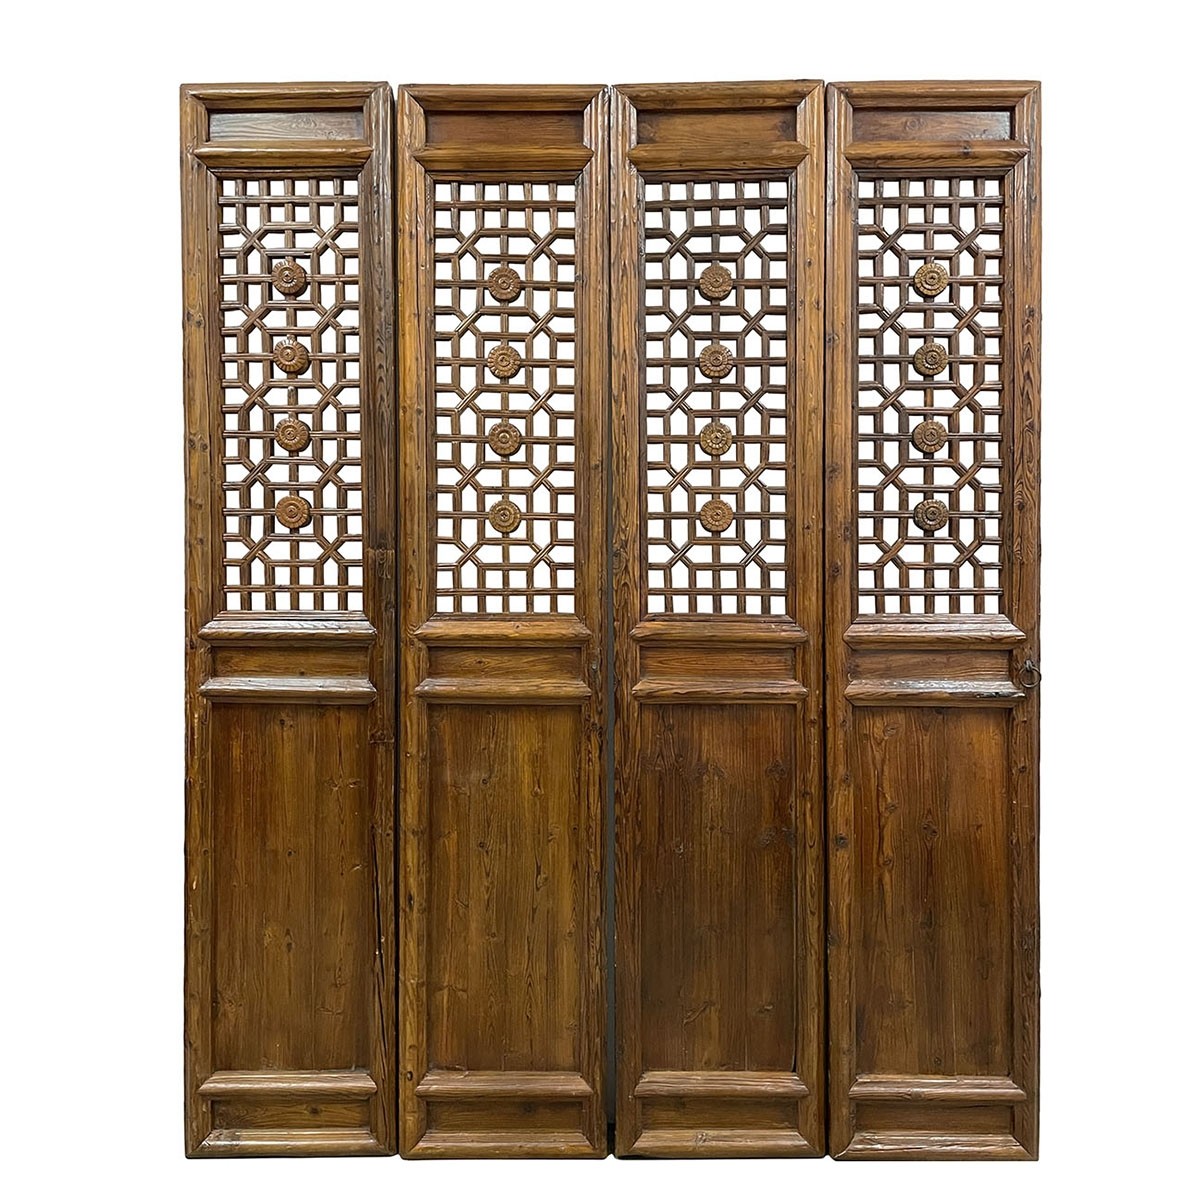 19th Century Antique Chinese Handcrafted 4 Panel Wooden Screen/Room Divider